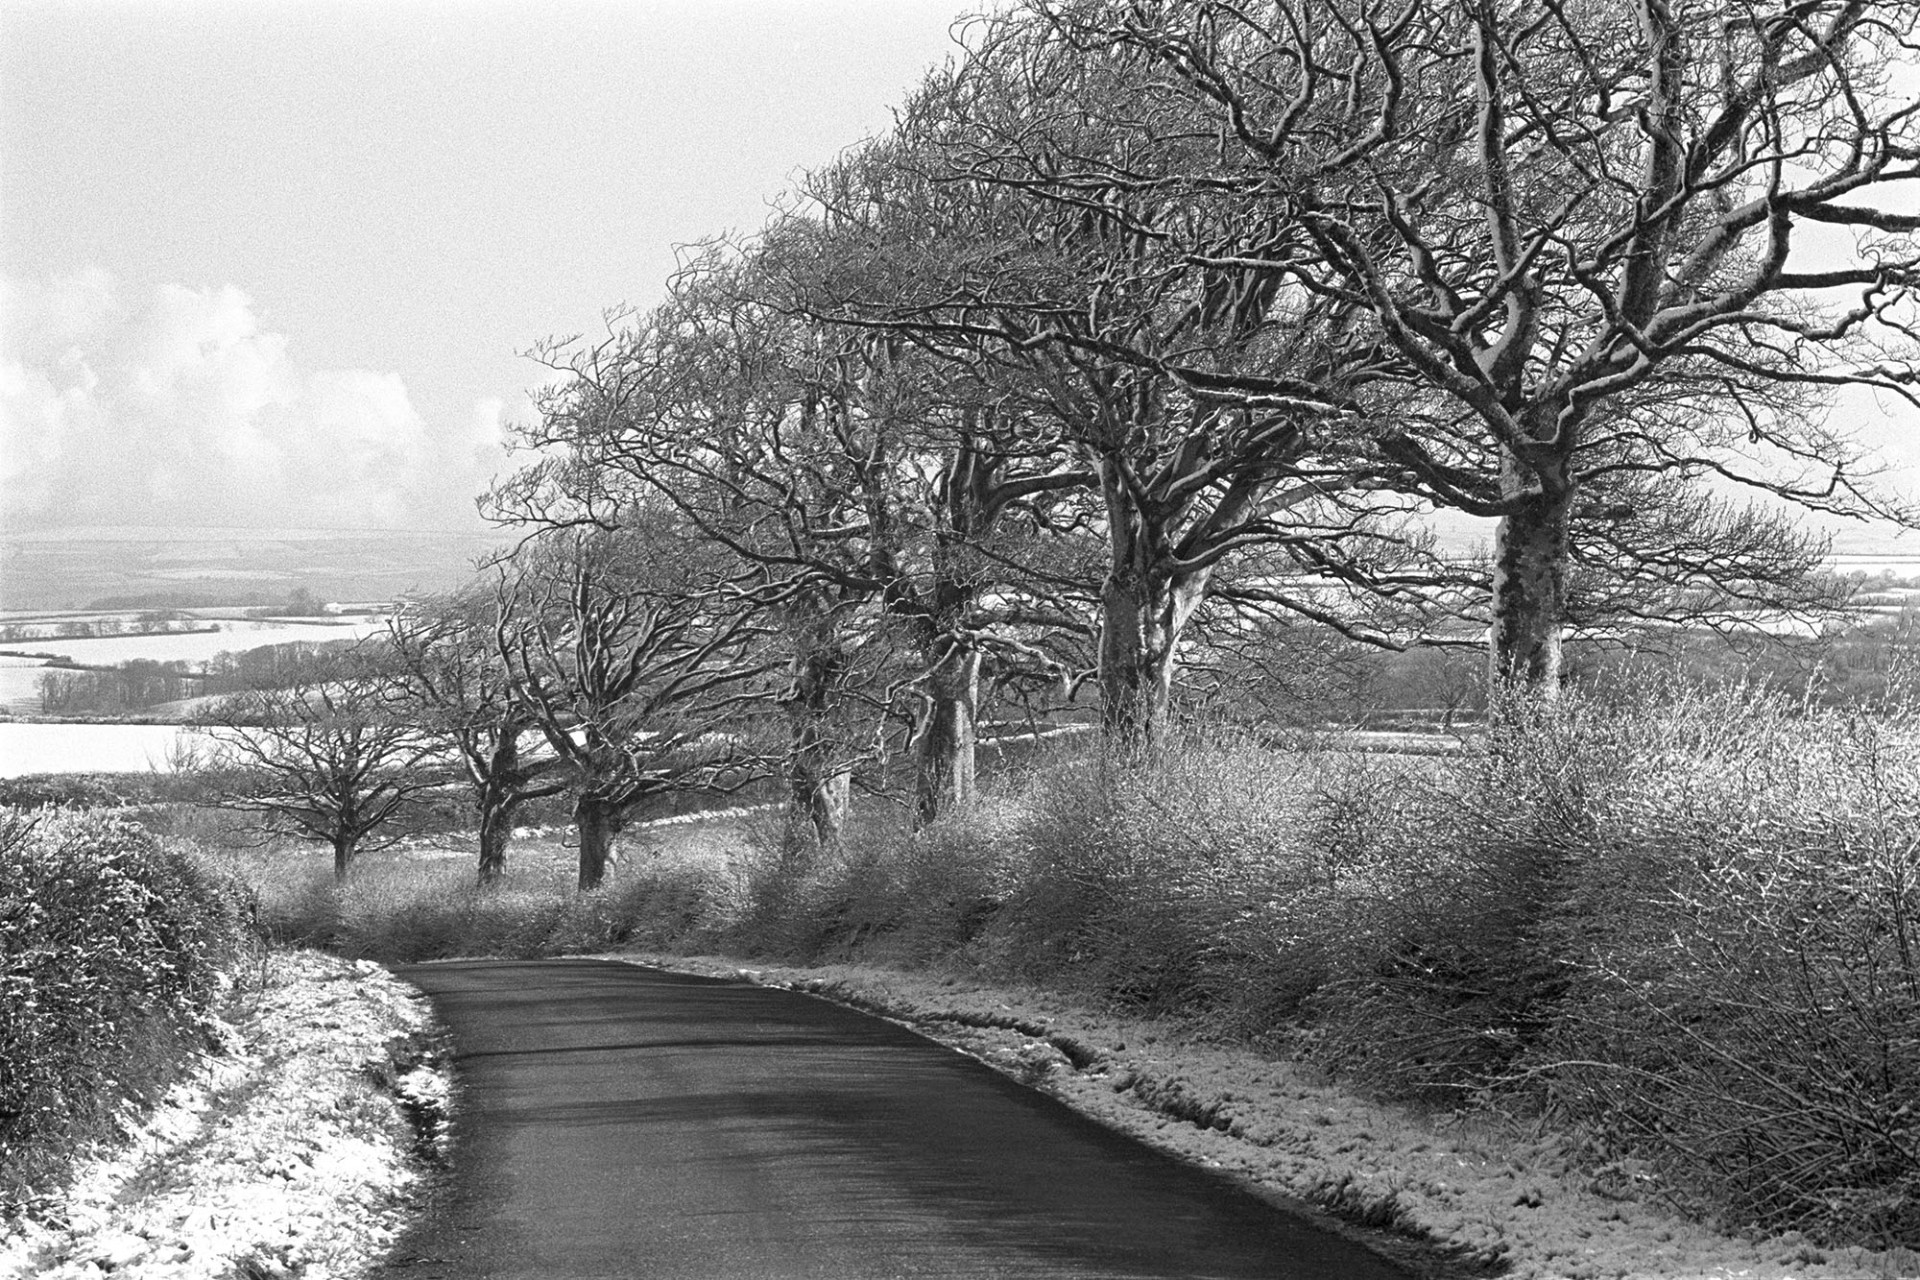 Snow, road and trees. 
[A road near Chulmleigh Beacon. The trees, hedgerows and verge are covered with snow.]